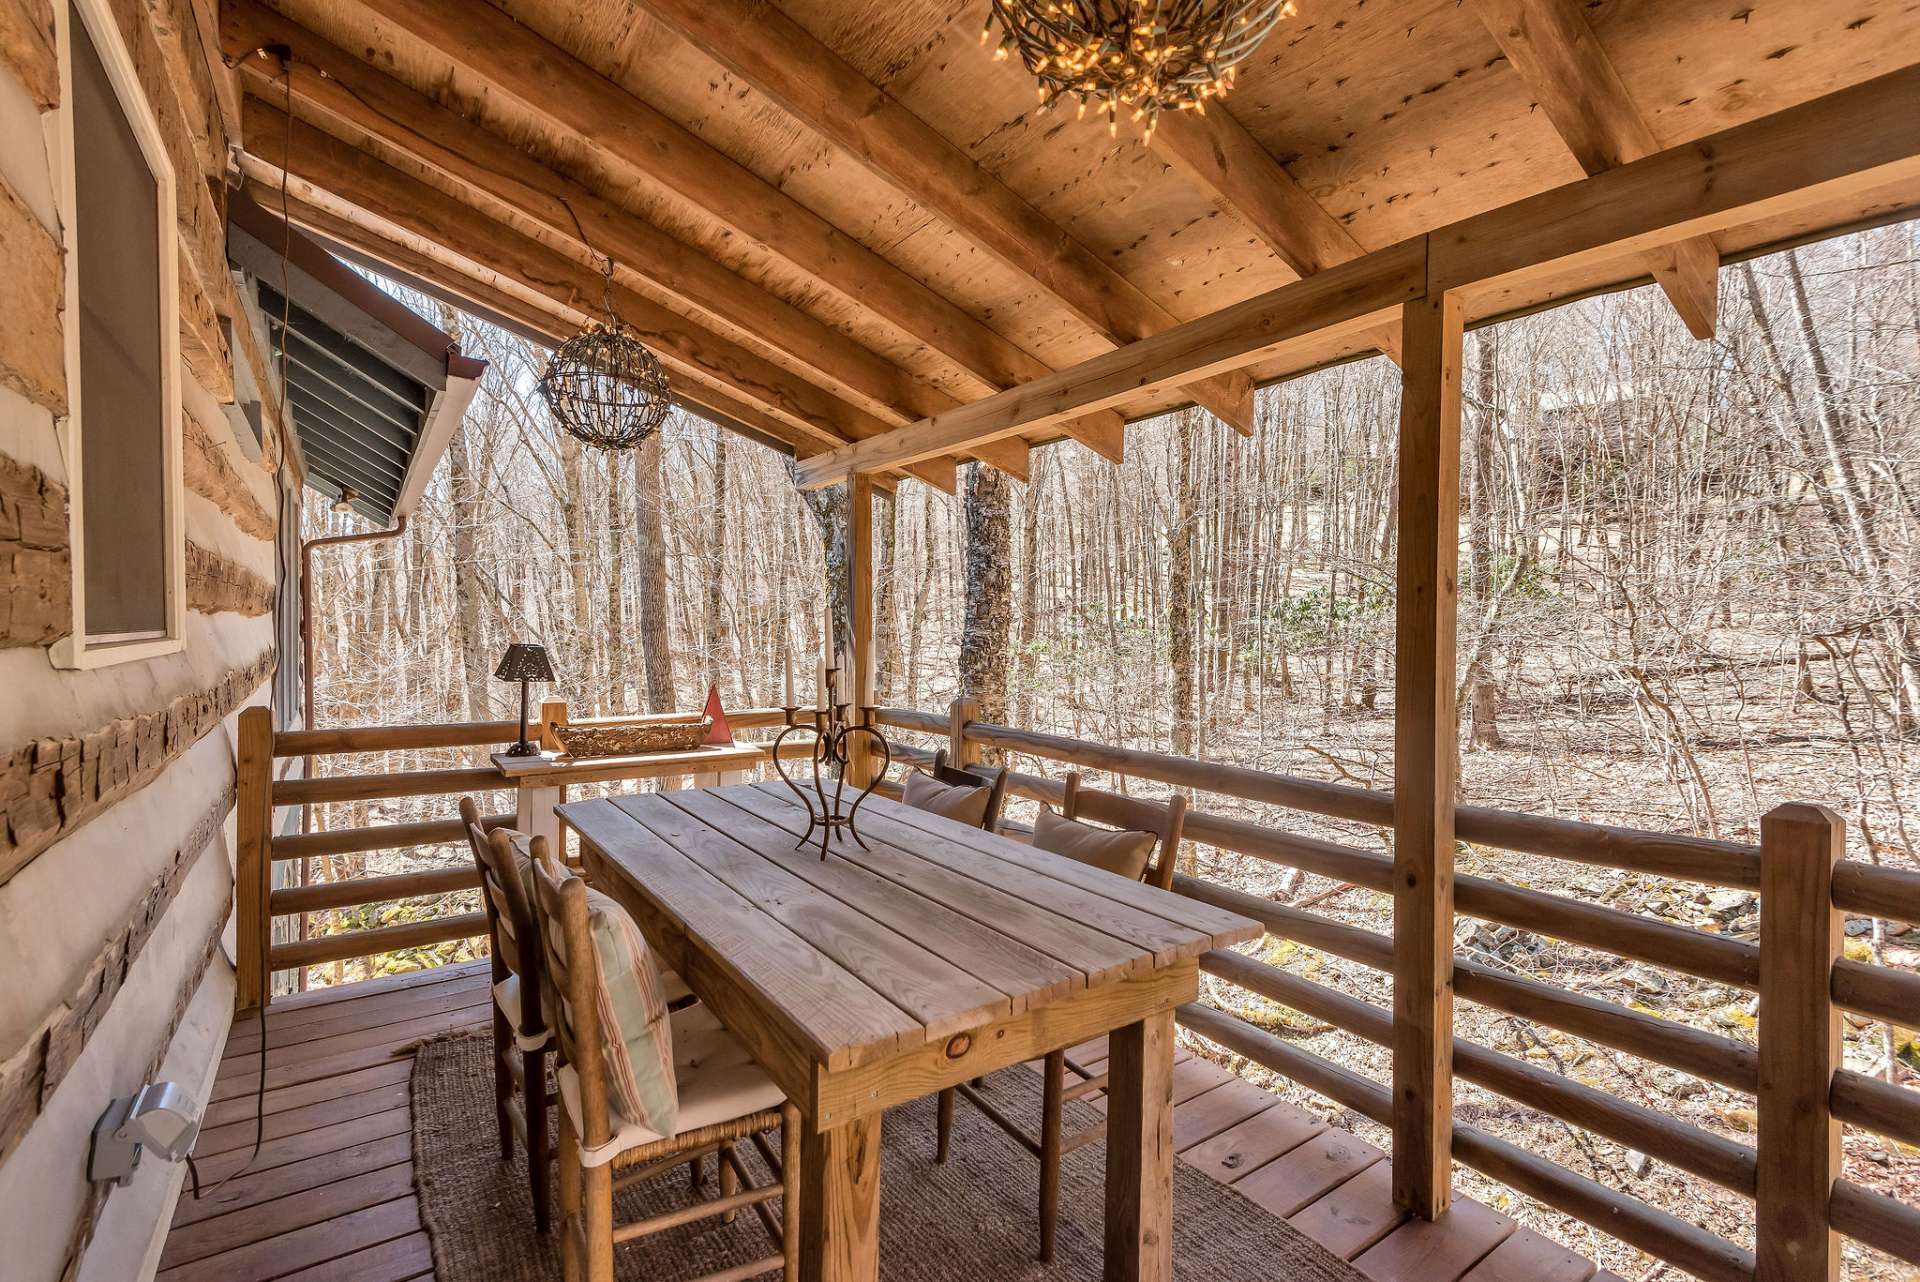 The covered back porch is the epitome of al fresco charm. Just imagine gathering with loved ones around a rustic table, savoring delicious meals while surrounded by nature's beauty.